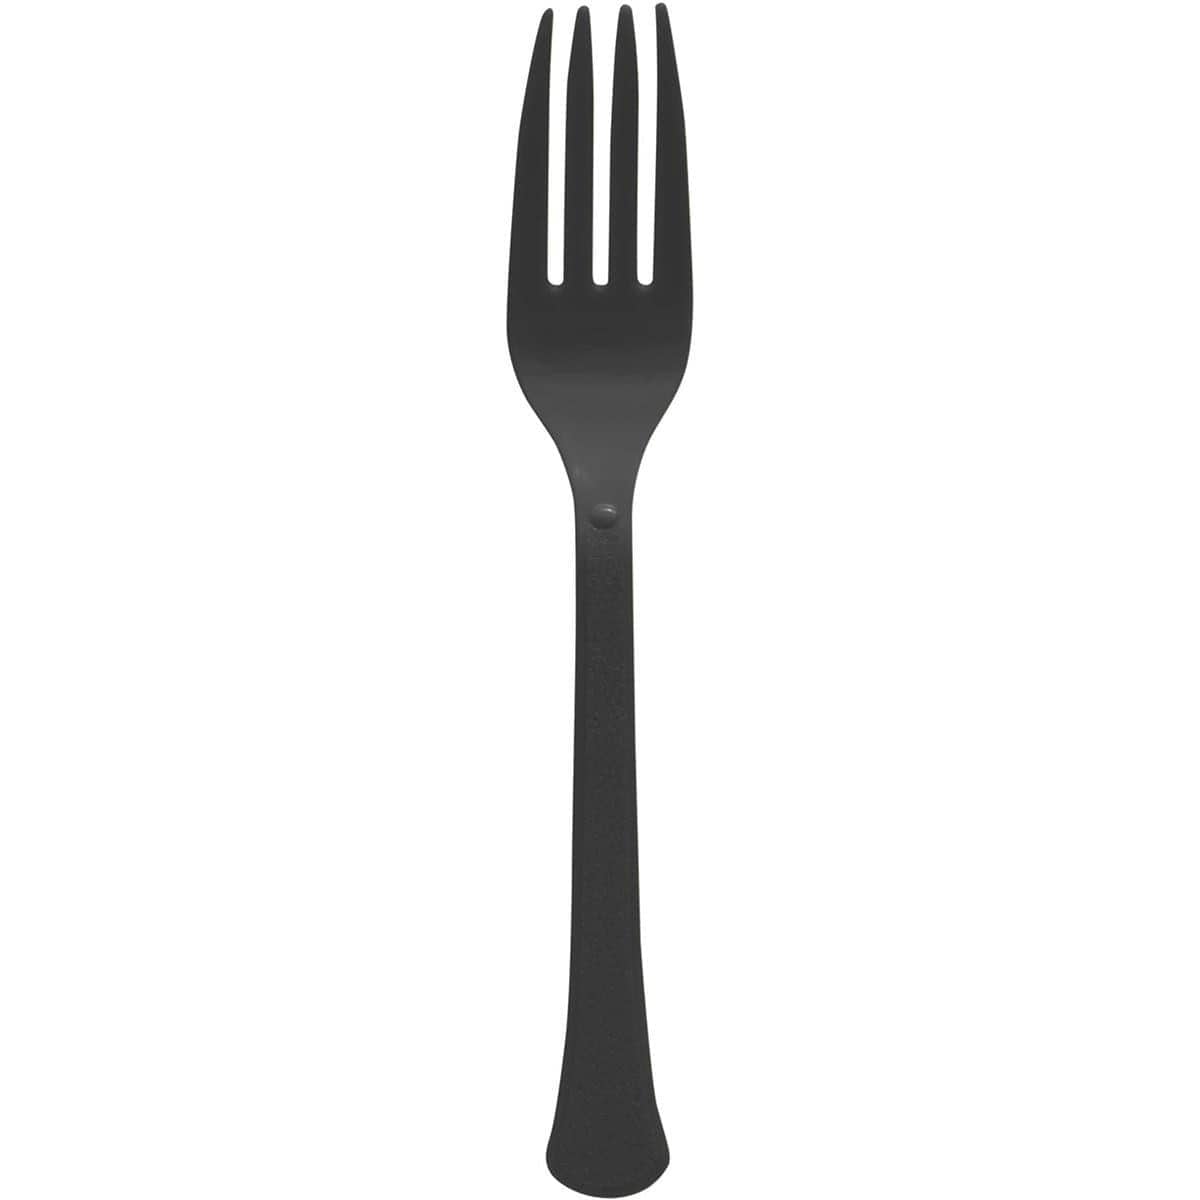 Buy Plasticware Jet Black Plastic Forks, 20 Count sold at Party Expert